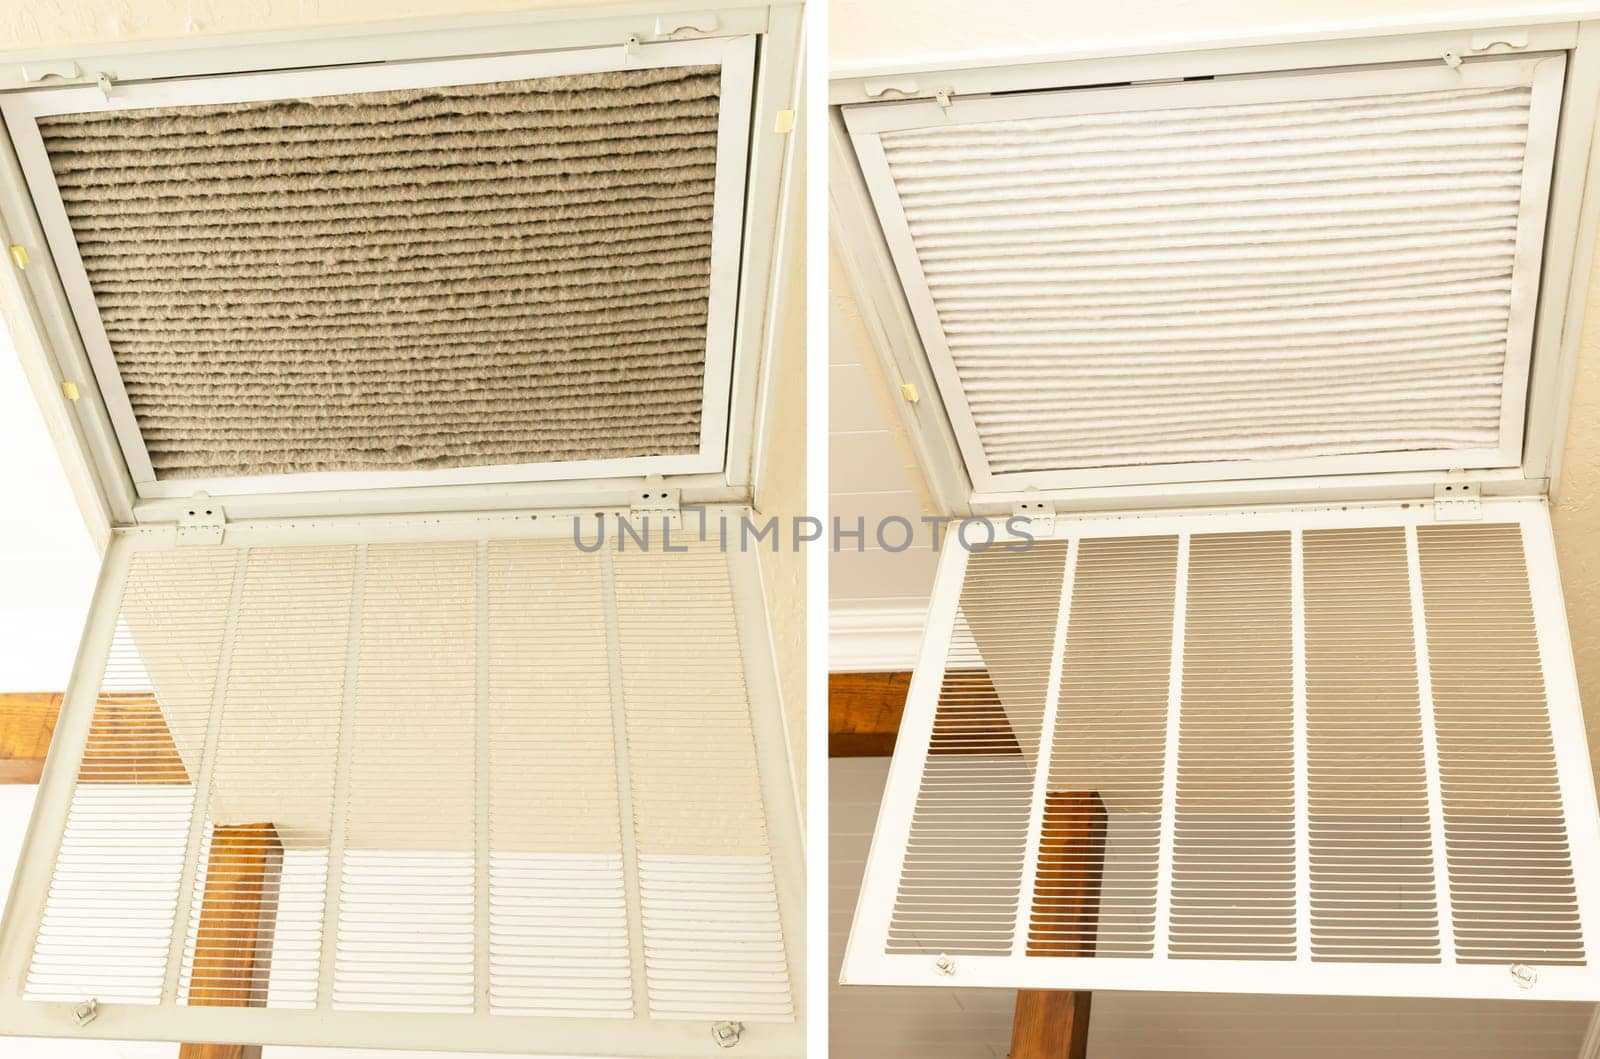 Before And After. Clean And Dirty Stainless Steel Pleated Ac Furnace Filters With Carbon. Air Filter Allergen Reduction Dust. Intake Vent, Home Air Conditioner. Horizontal Plane. HVAC System by netatsi